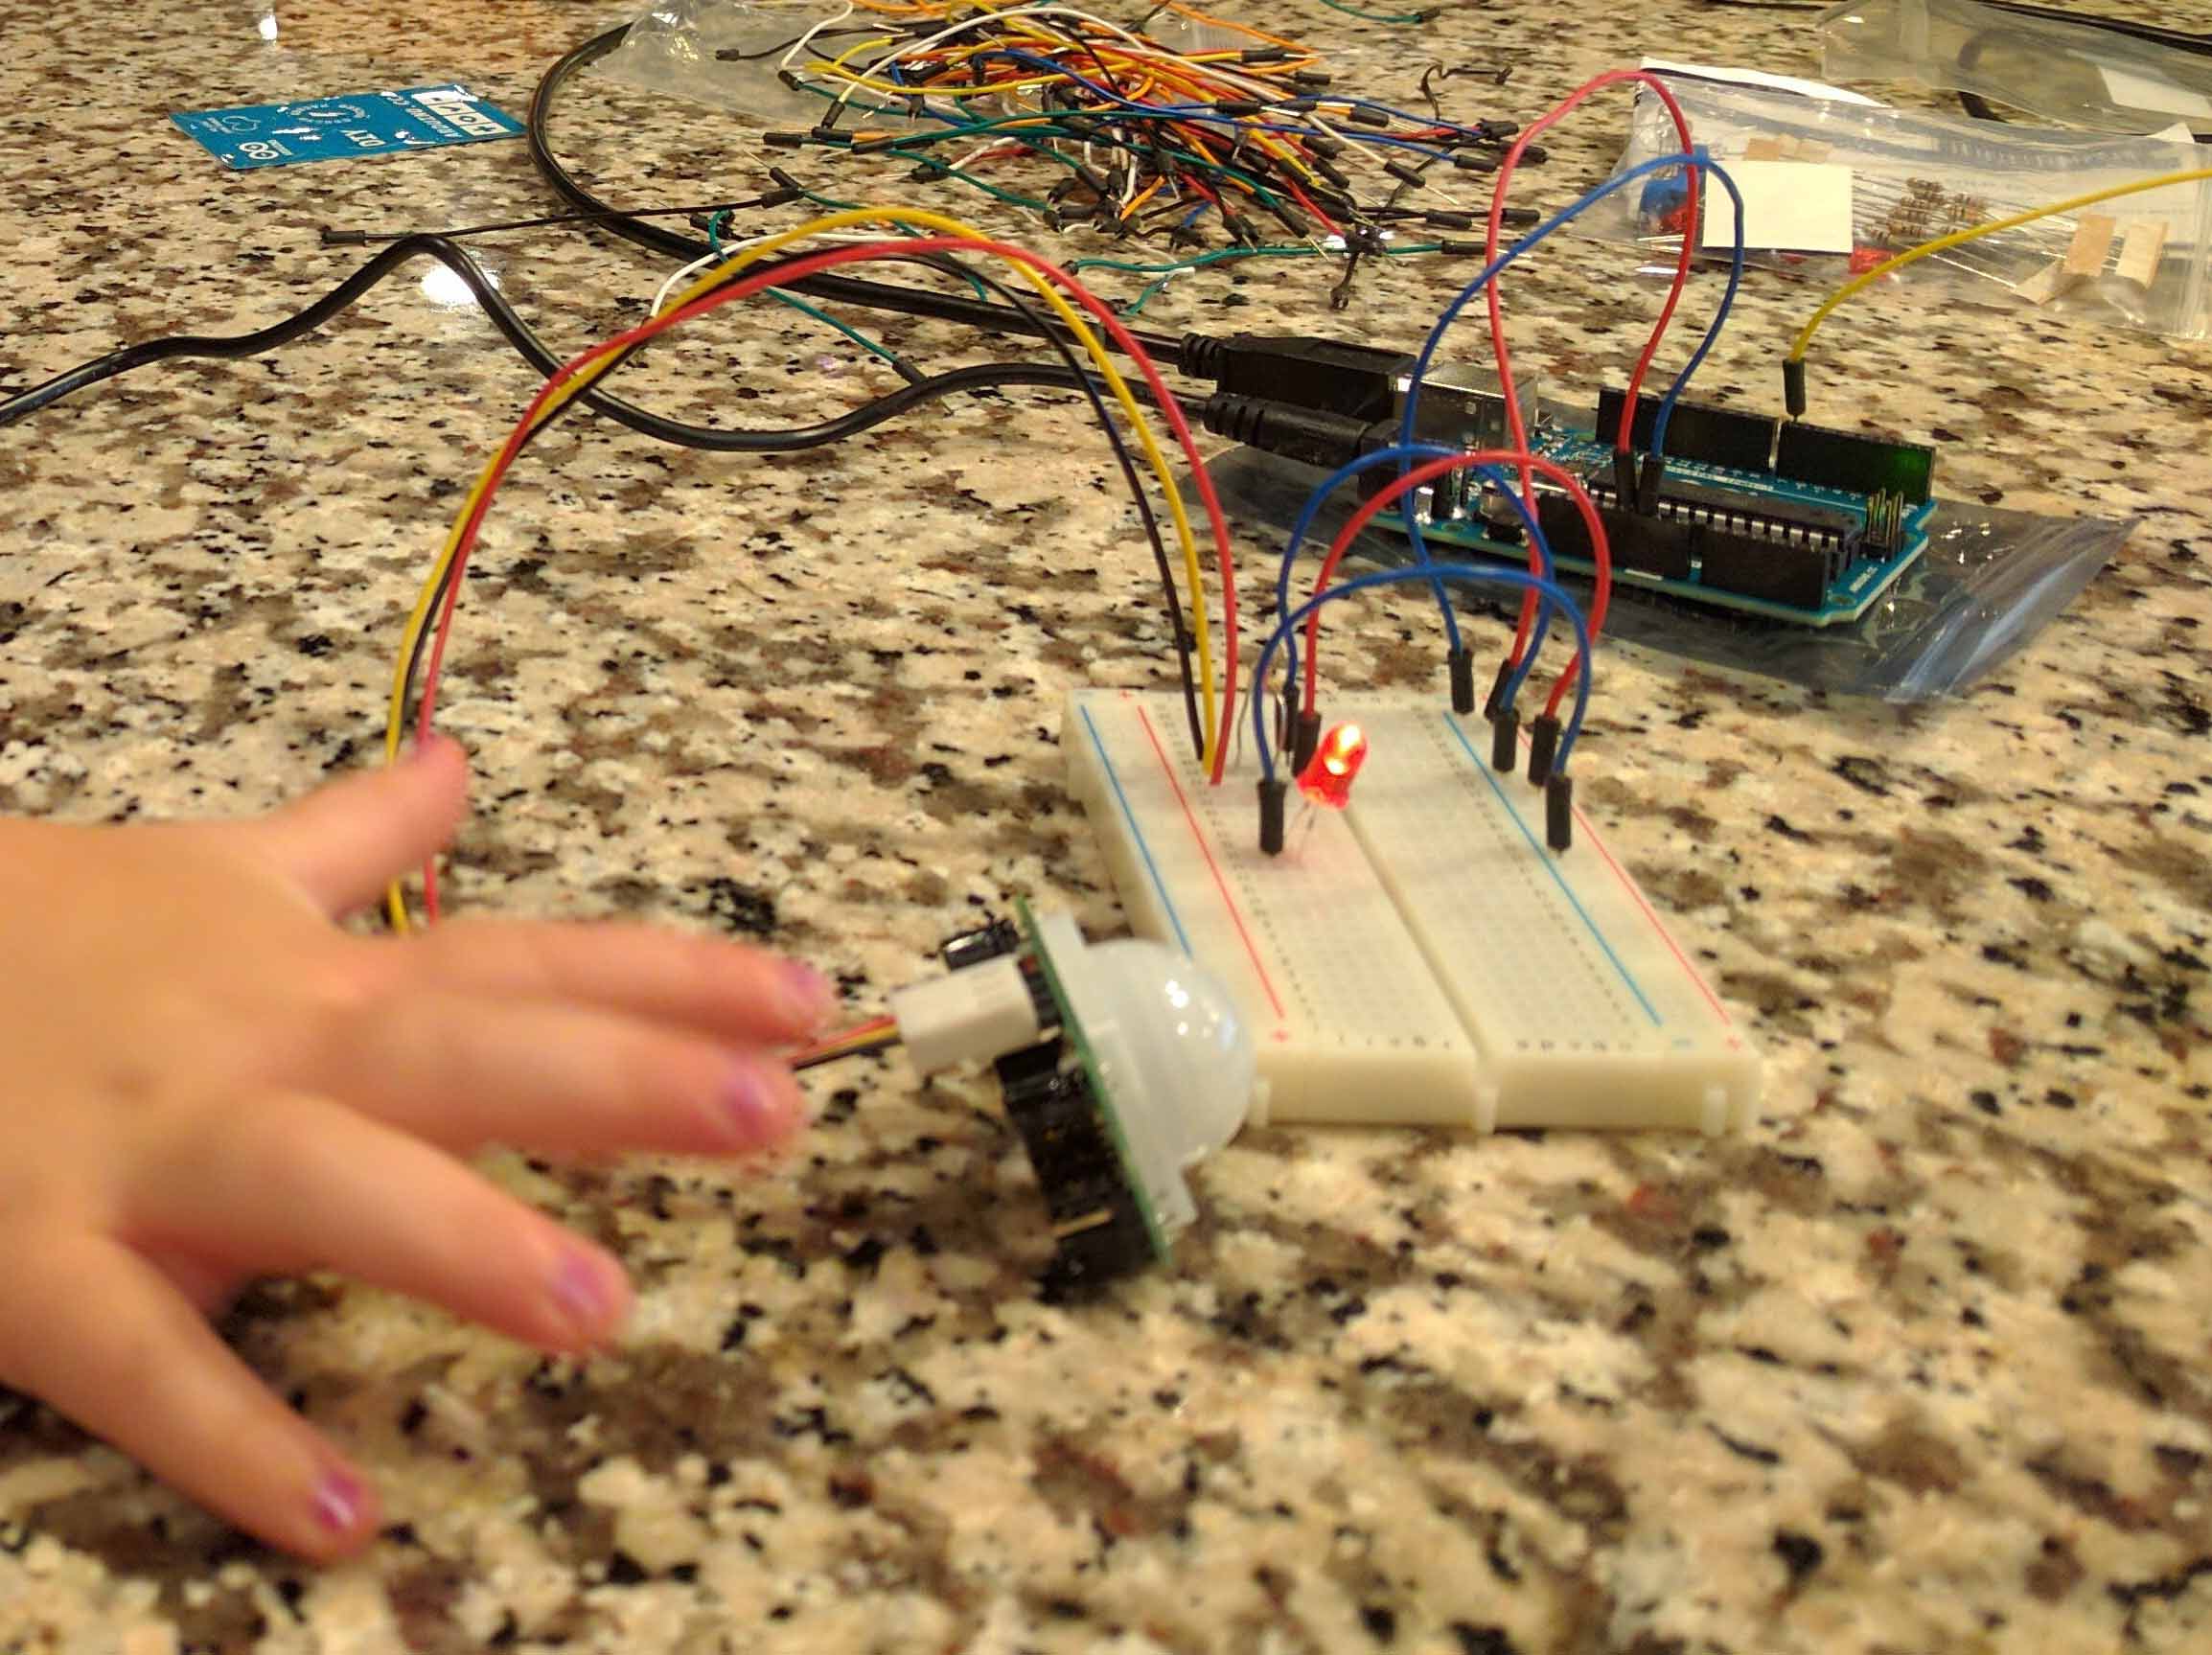 Small hand testing out motion sensor